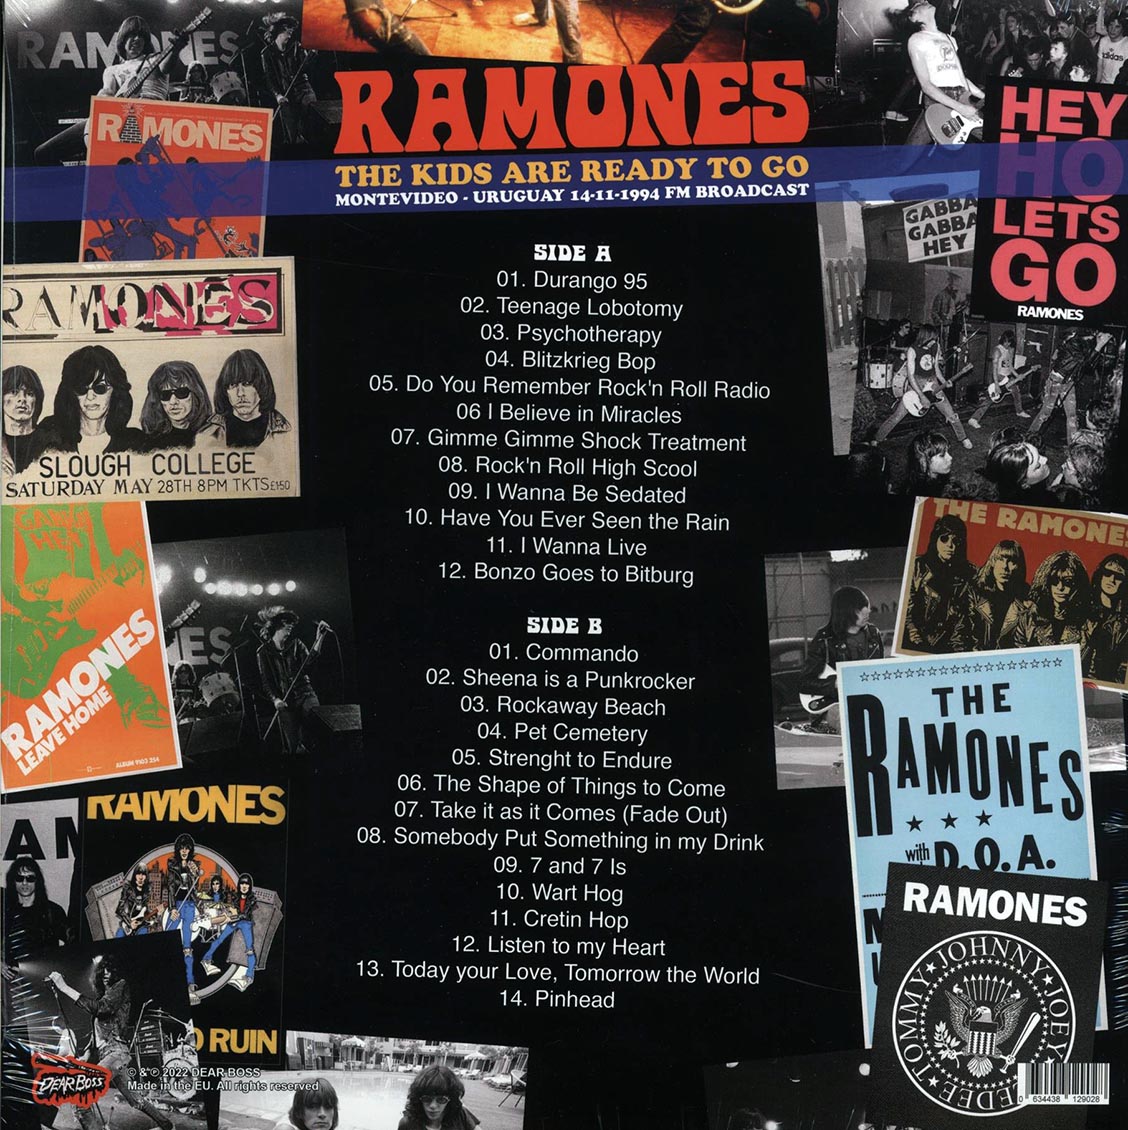 Ramones - The Kids Are Ready to Go [2022 Unofficial FM] [New Vinyl Record LP]